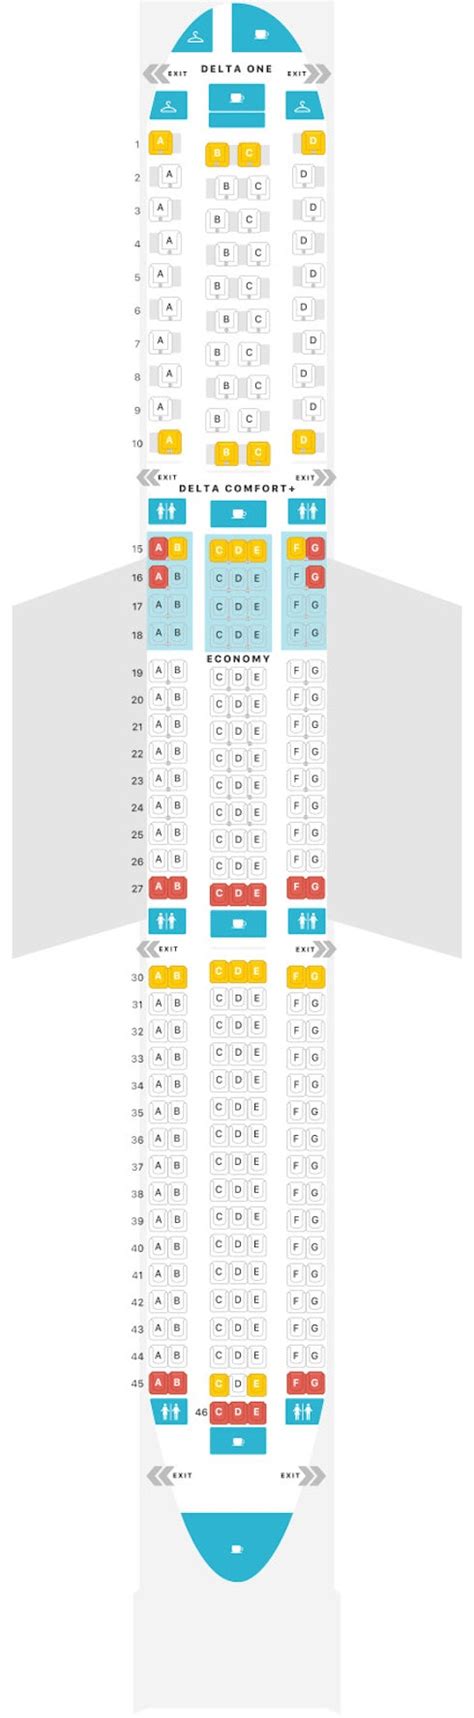 Delta Airlines Boeing 767 300 Seat Map